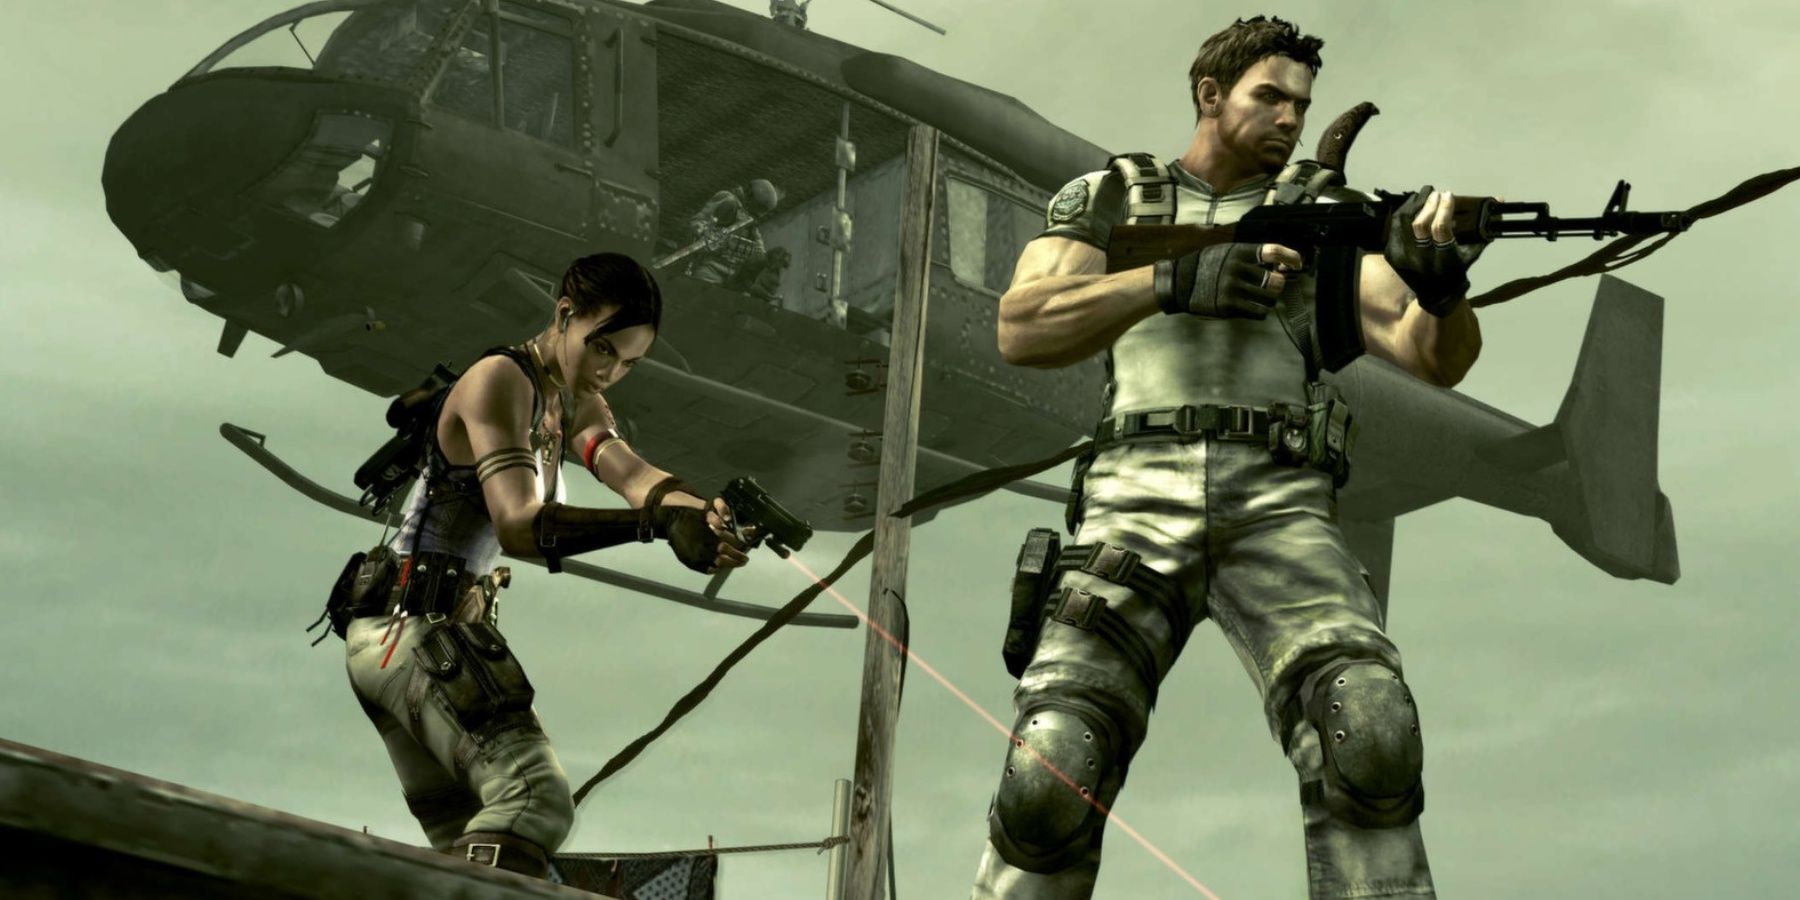 chris and sheva standing in front of a helicopter